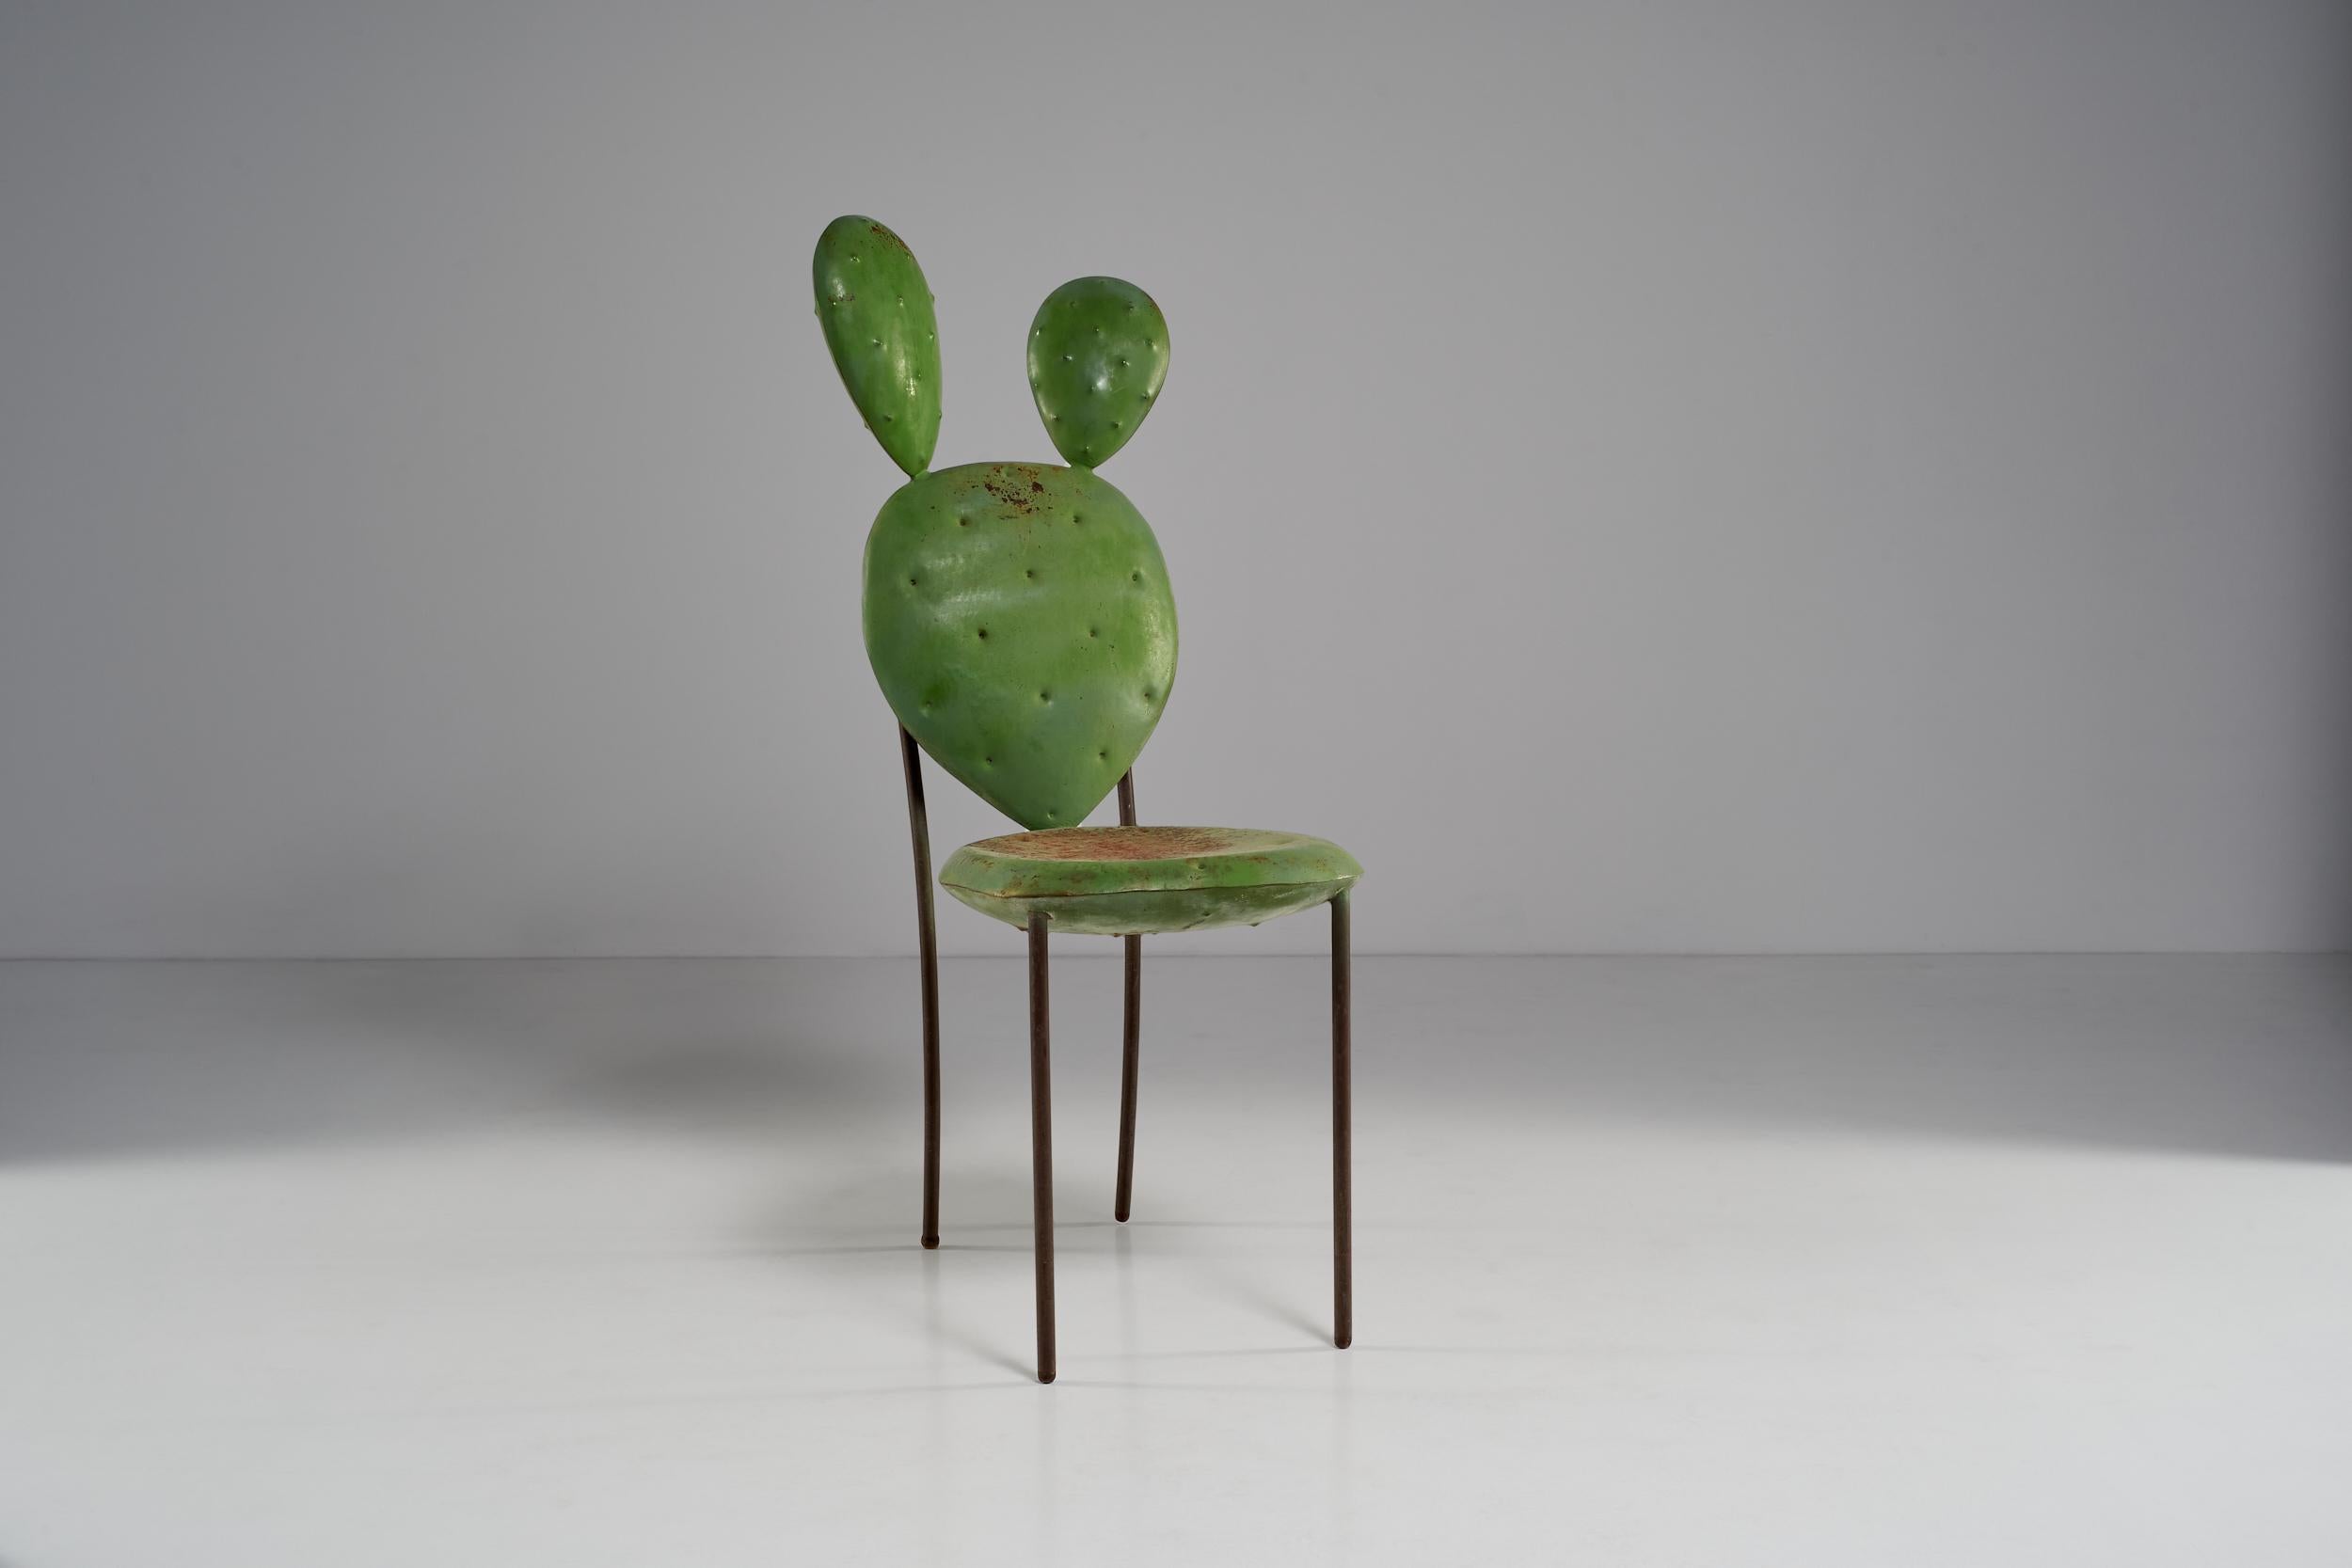 Mid-Century Modern Metal Chair with Cactus-Like Decorative Elements, 1970 circa